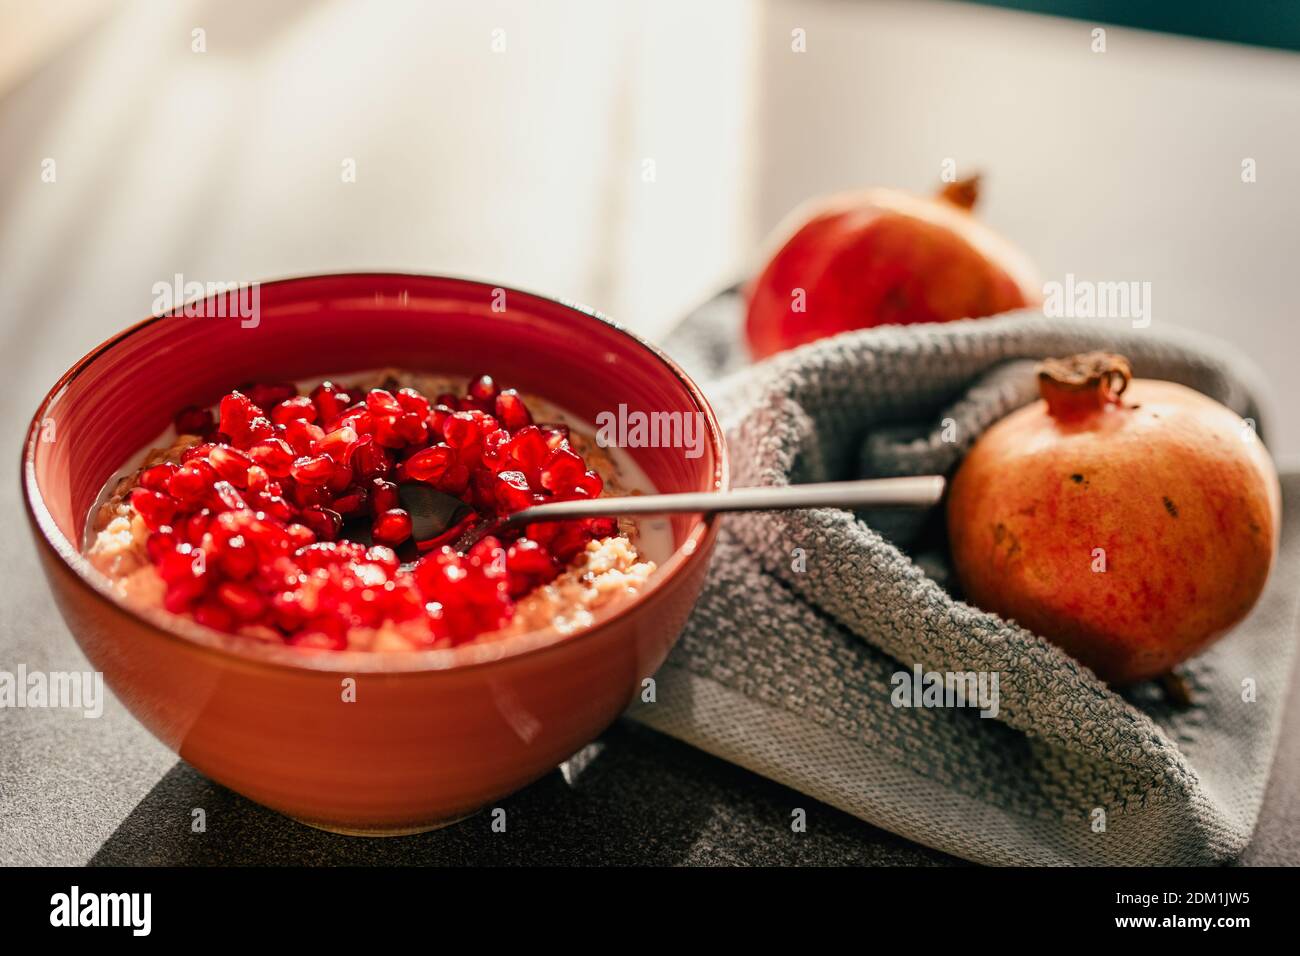 Homemade low carb diet almond and coconut flakes porridge with red pomegranate seeds.Morning light.Healthy organic nutritious vegan breakfast.Chia see Stock Photo